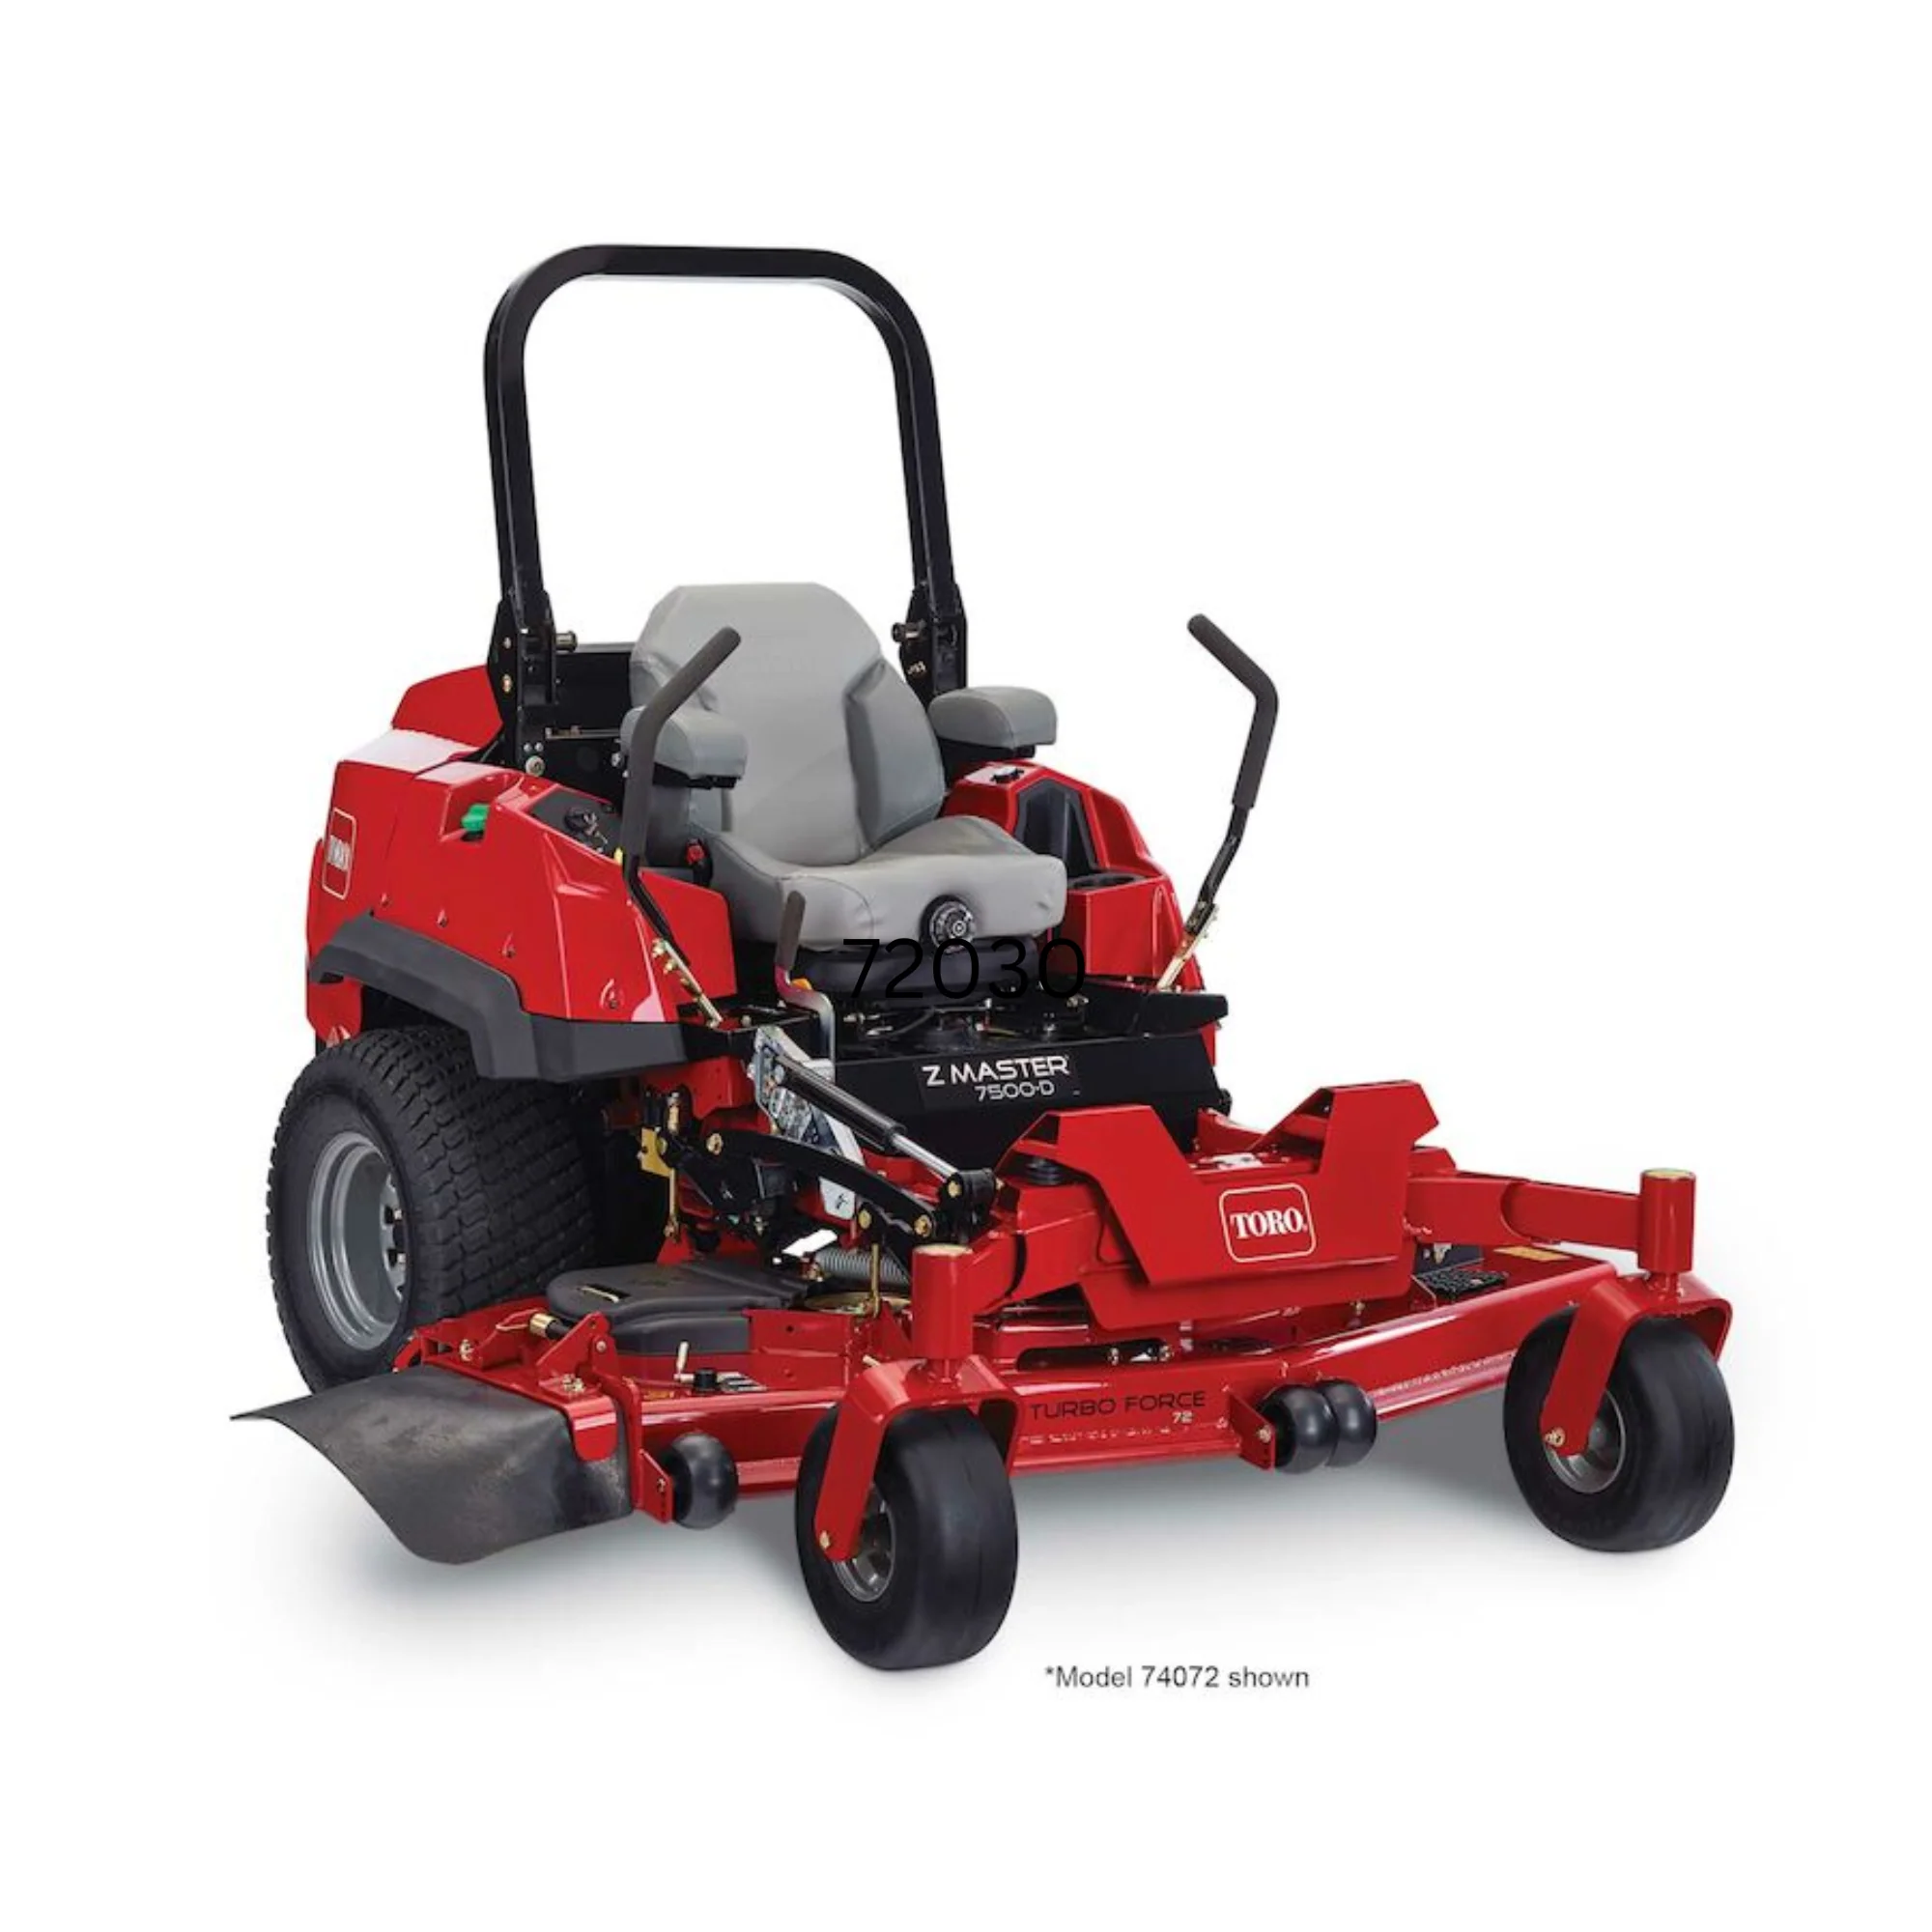 Z Master Professional 7500-D Series Riding Mower, With 72in TURBO FORCE Side Discharge Mower